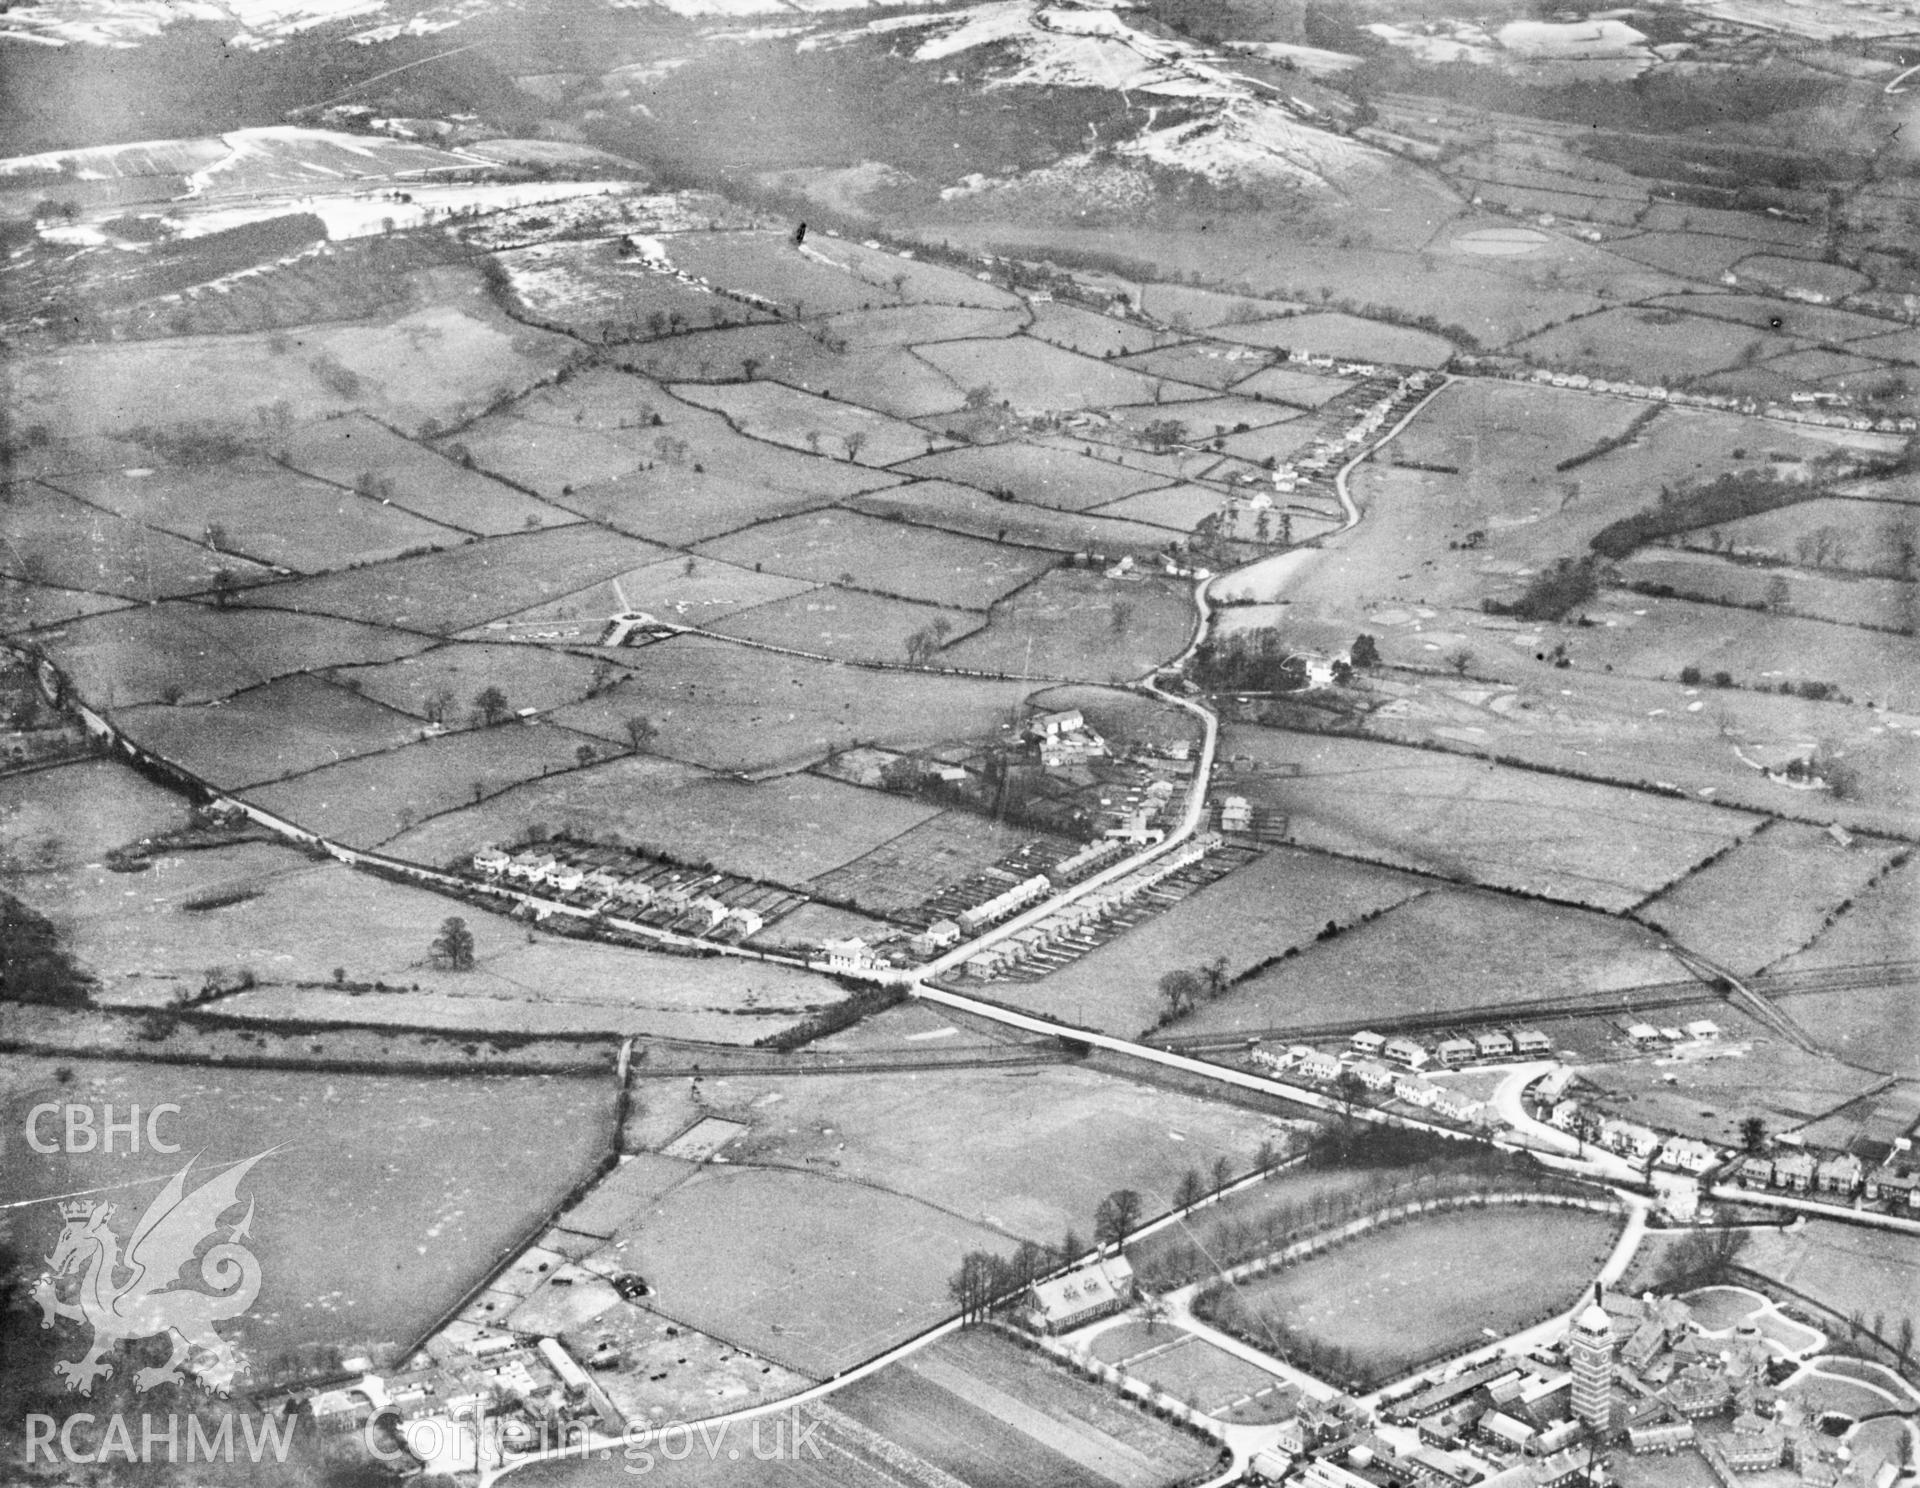 View of the Whitchurch area of Cardiff showing Whitchurch Hospital and distant view of Forest Fawr. Oblique aerial photograph, 5?x4? BW glass plate.